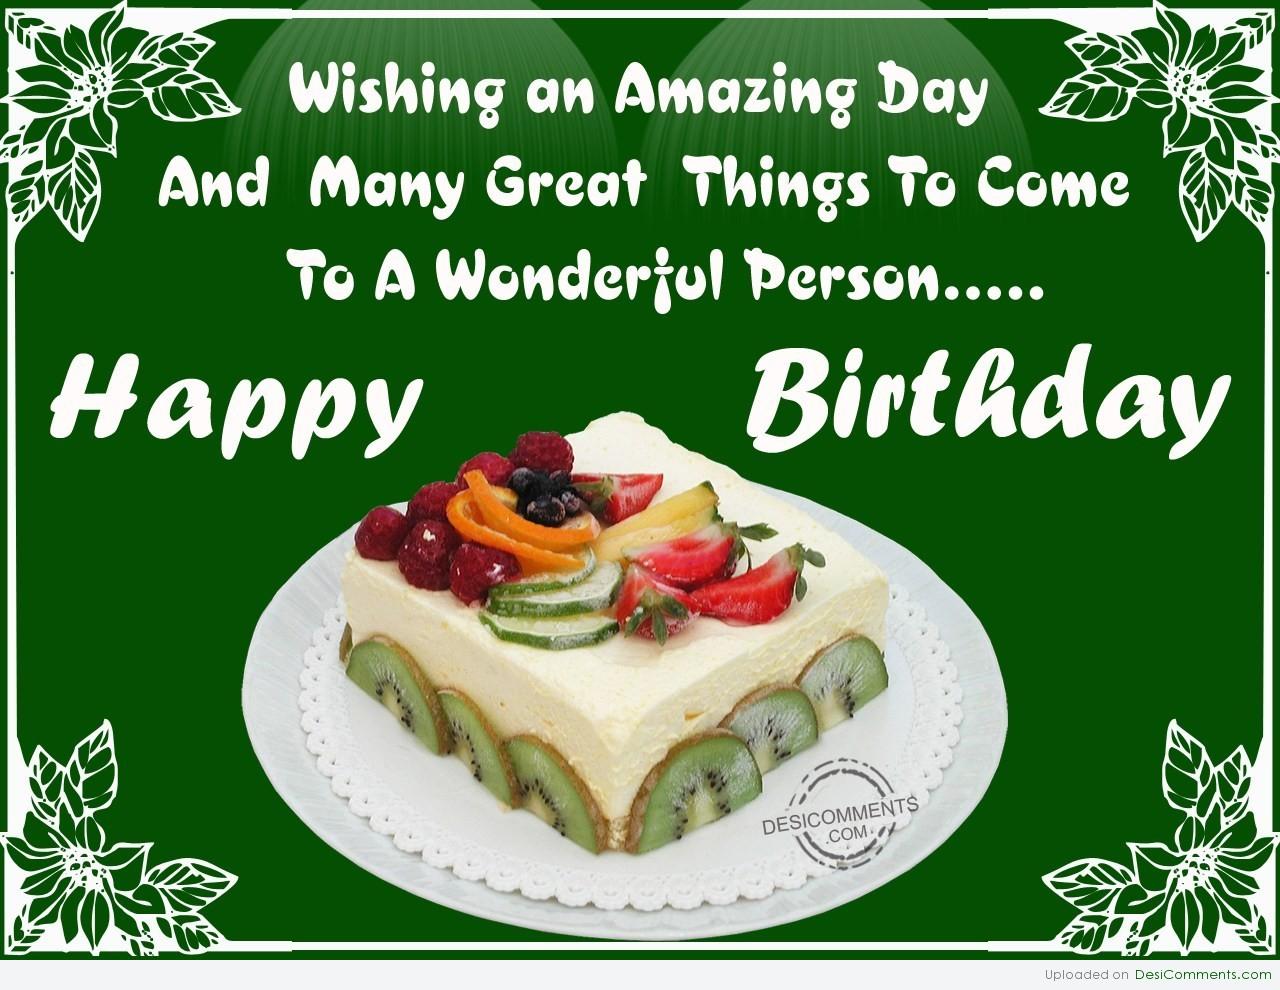 Happy Birthday To A Wonderful Person - DesiComments.com